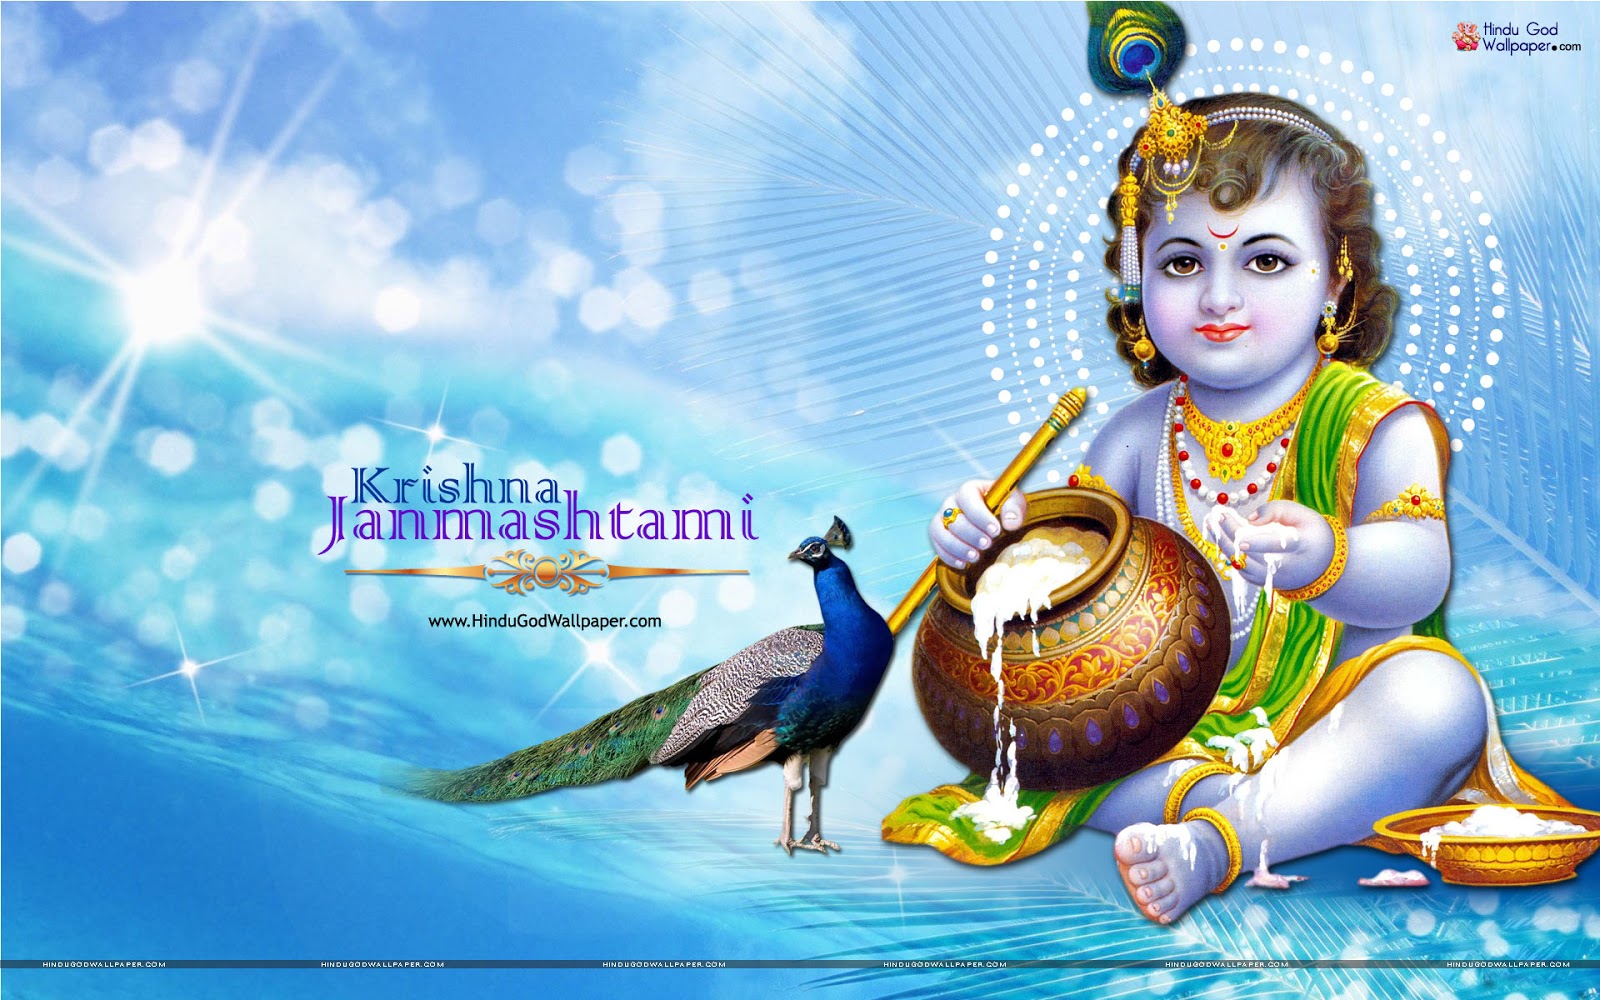 May Lord Krishna drizzle the entire